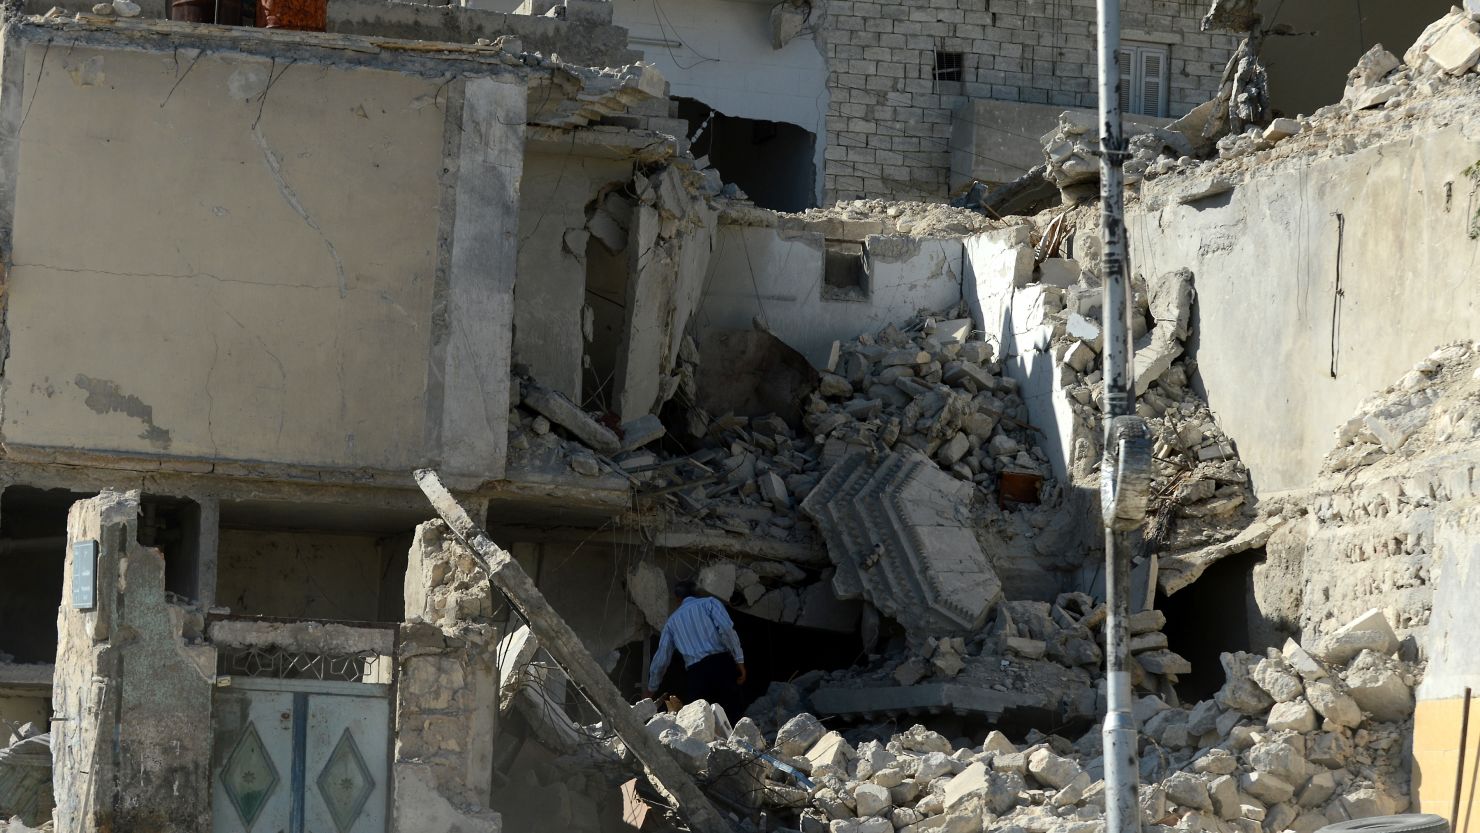 A man inspects a destroyed building following shelling by regime forces in the northern city of Aleppo on Monday.